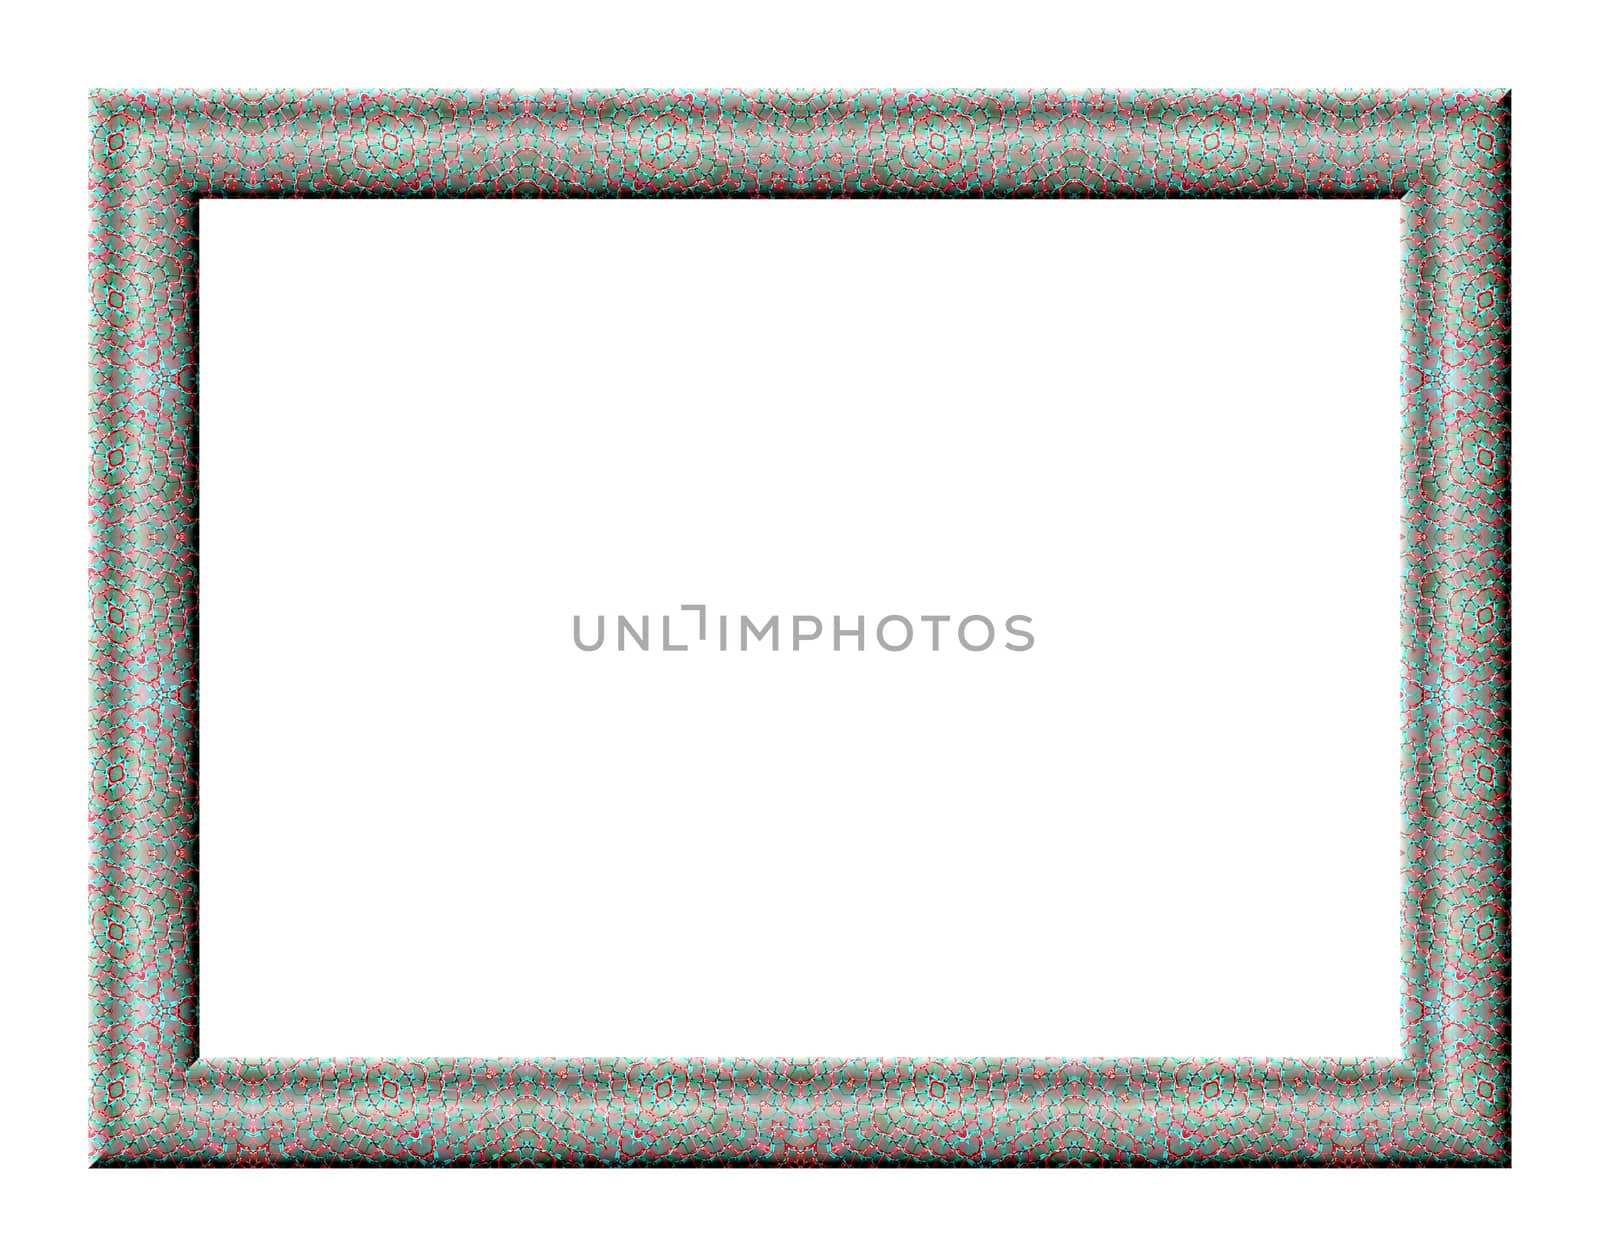 Rectangular empty picture frame with a mesh texture on white background